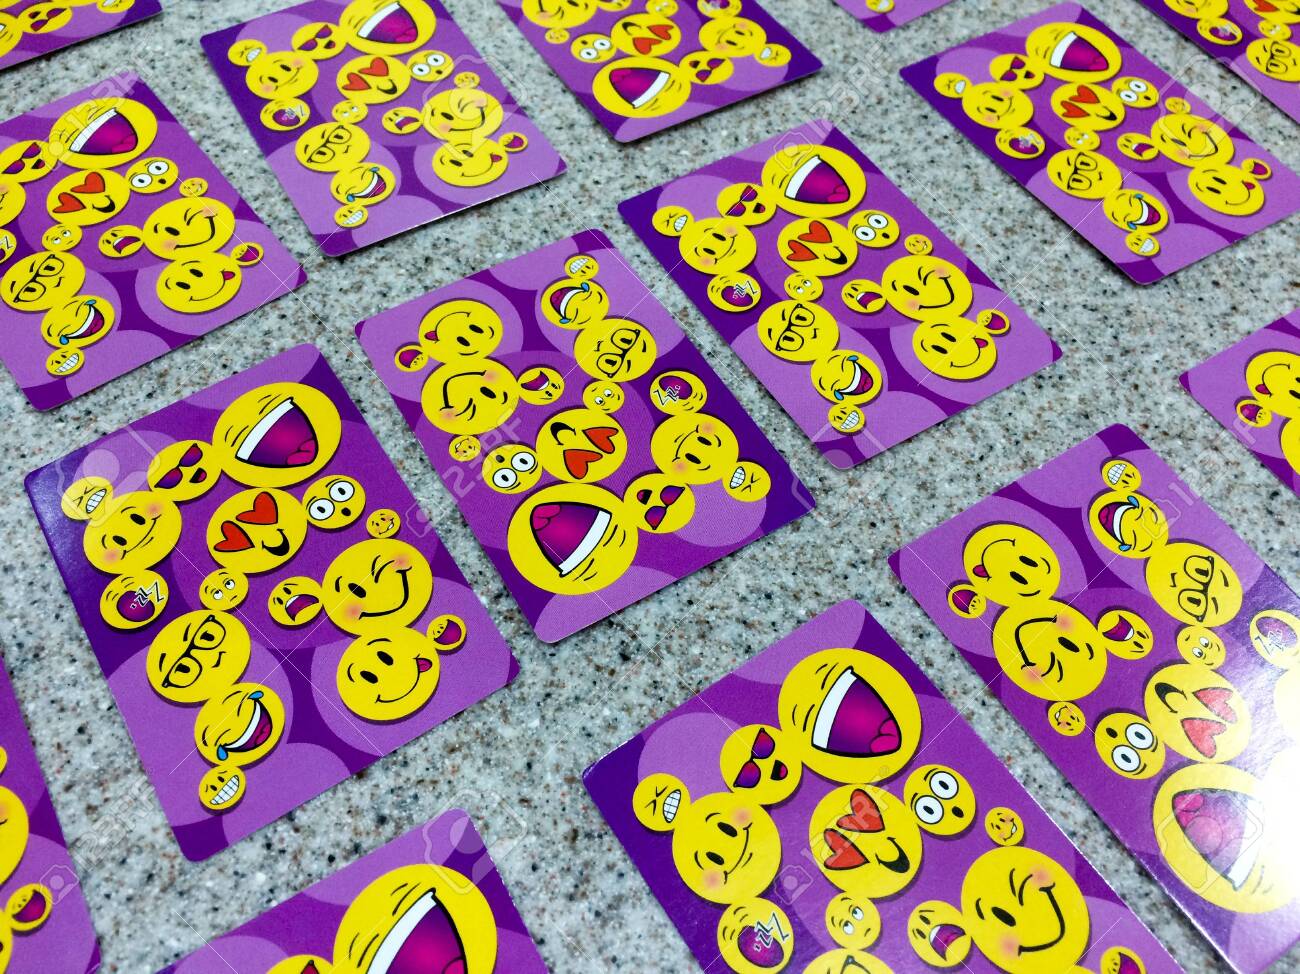 Happy face smiely emoji on playing cards purple color on table stock photo picture and royalty free image image